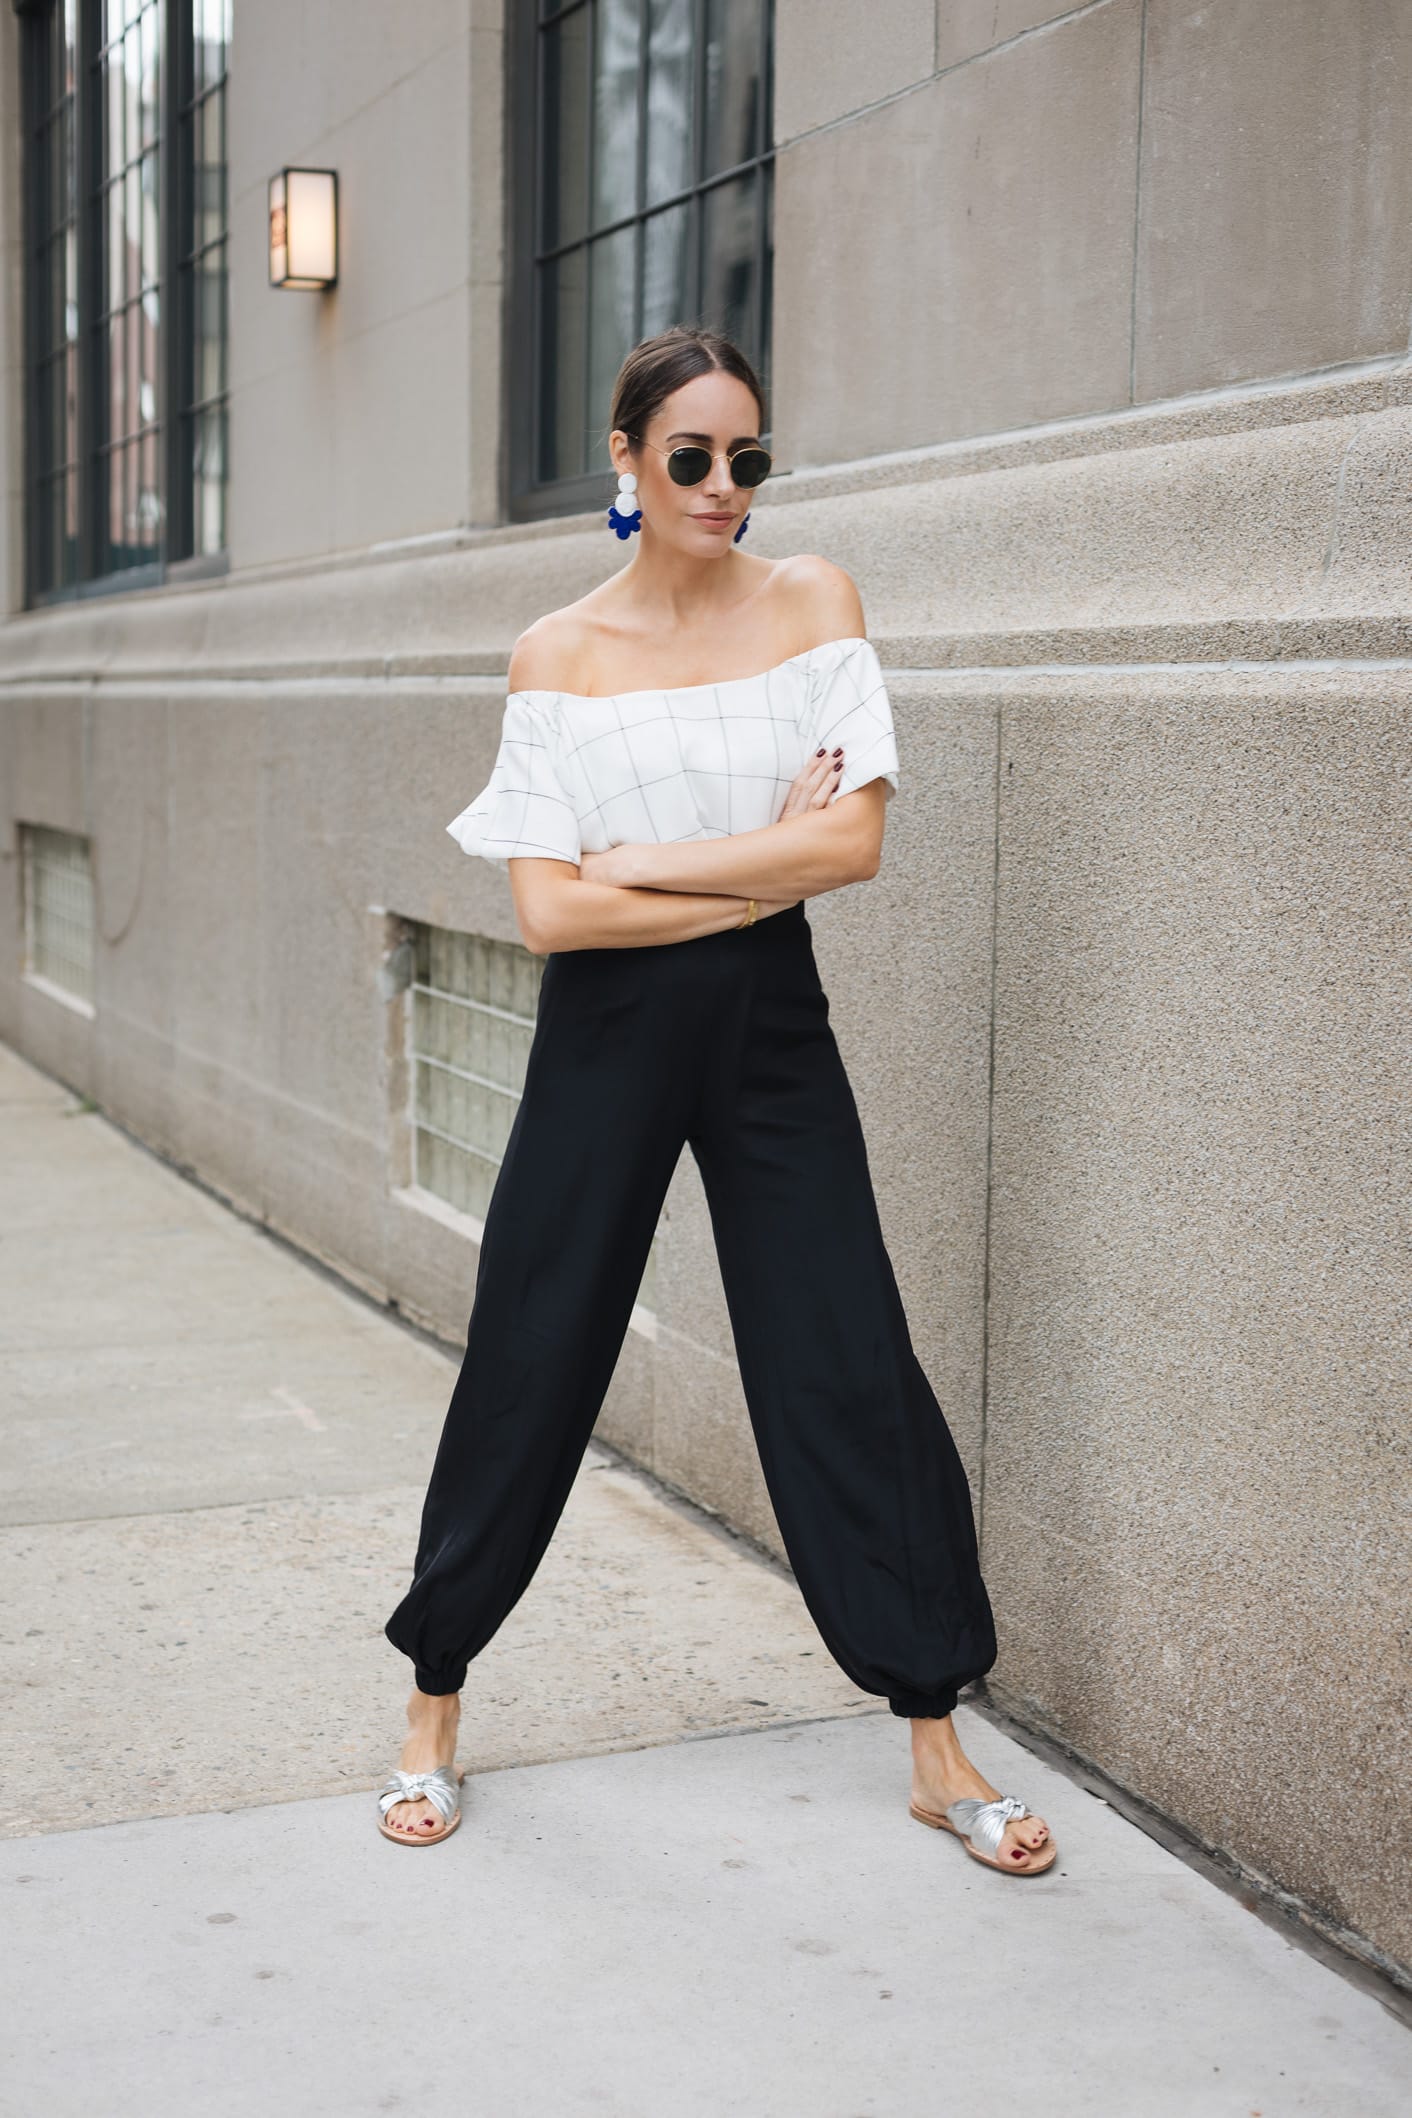 Louise Roe wearing off shoulder top in NYC